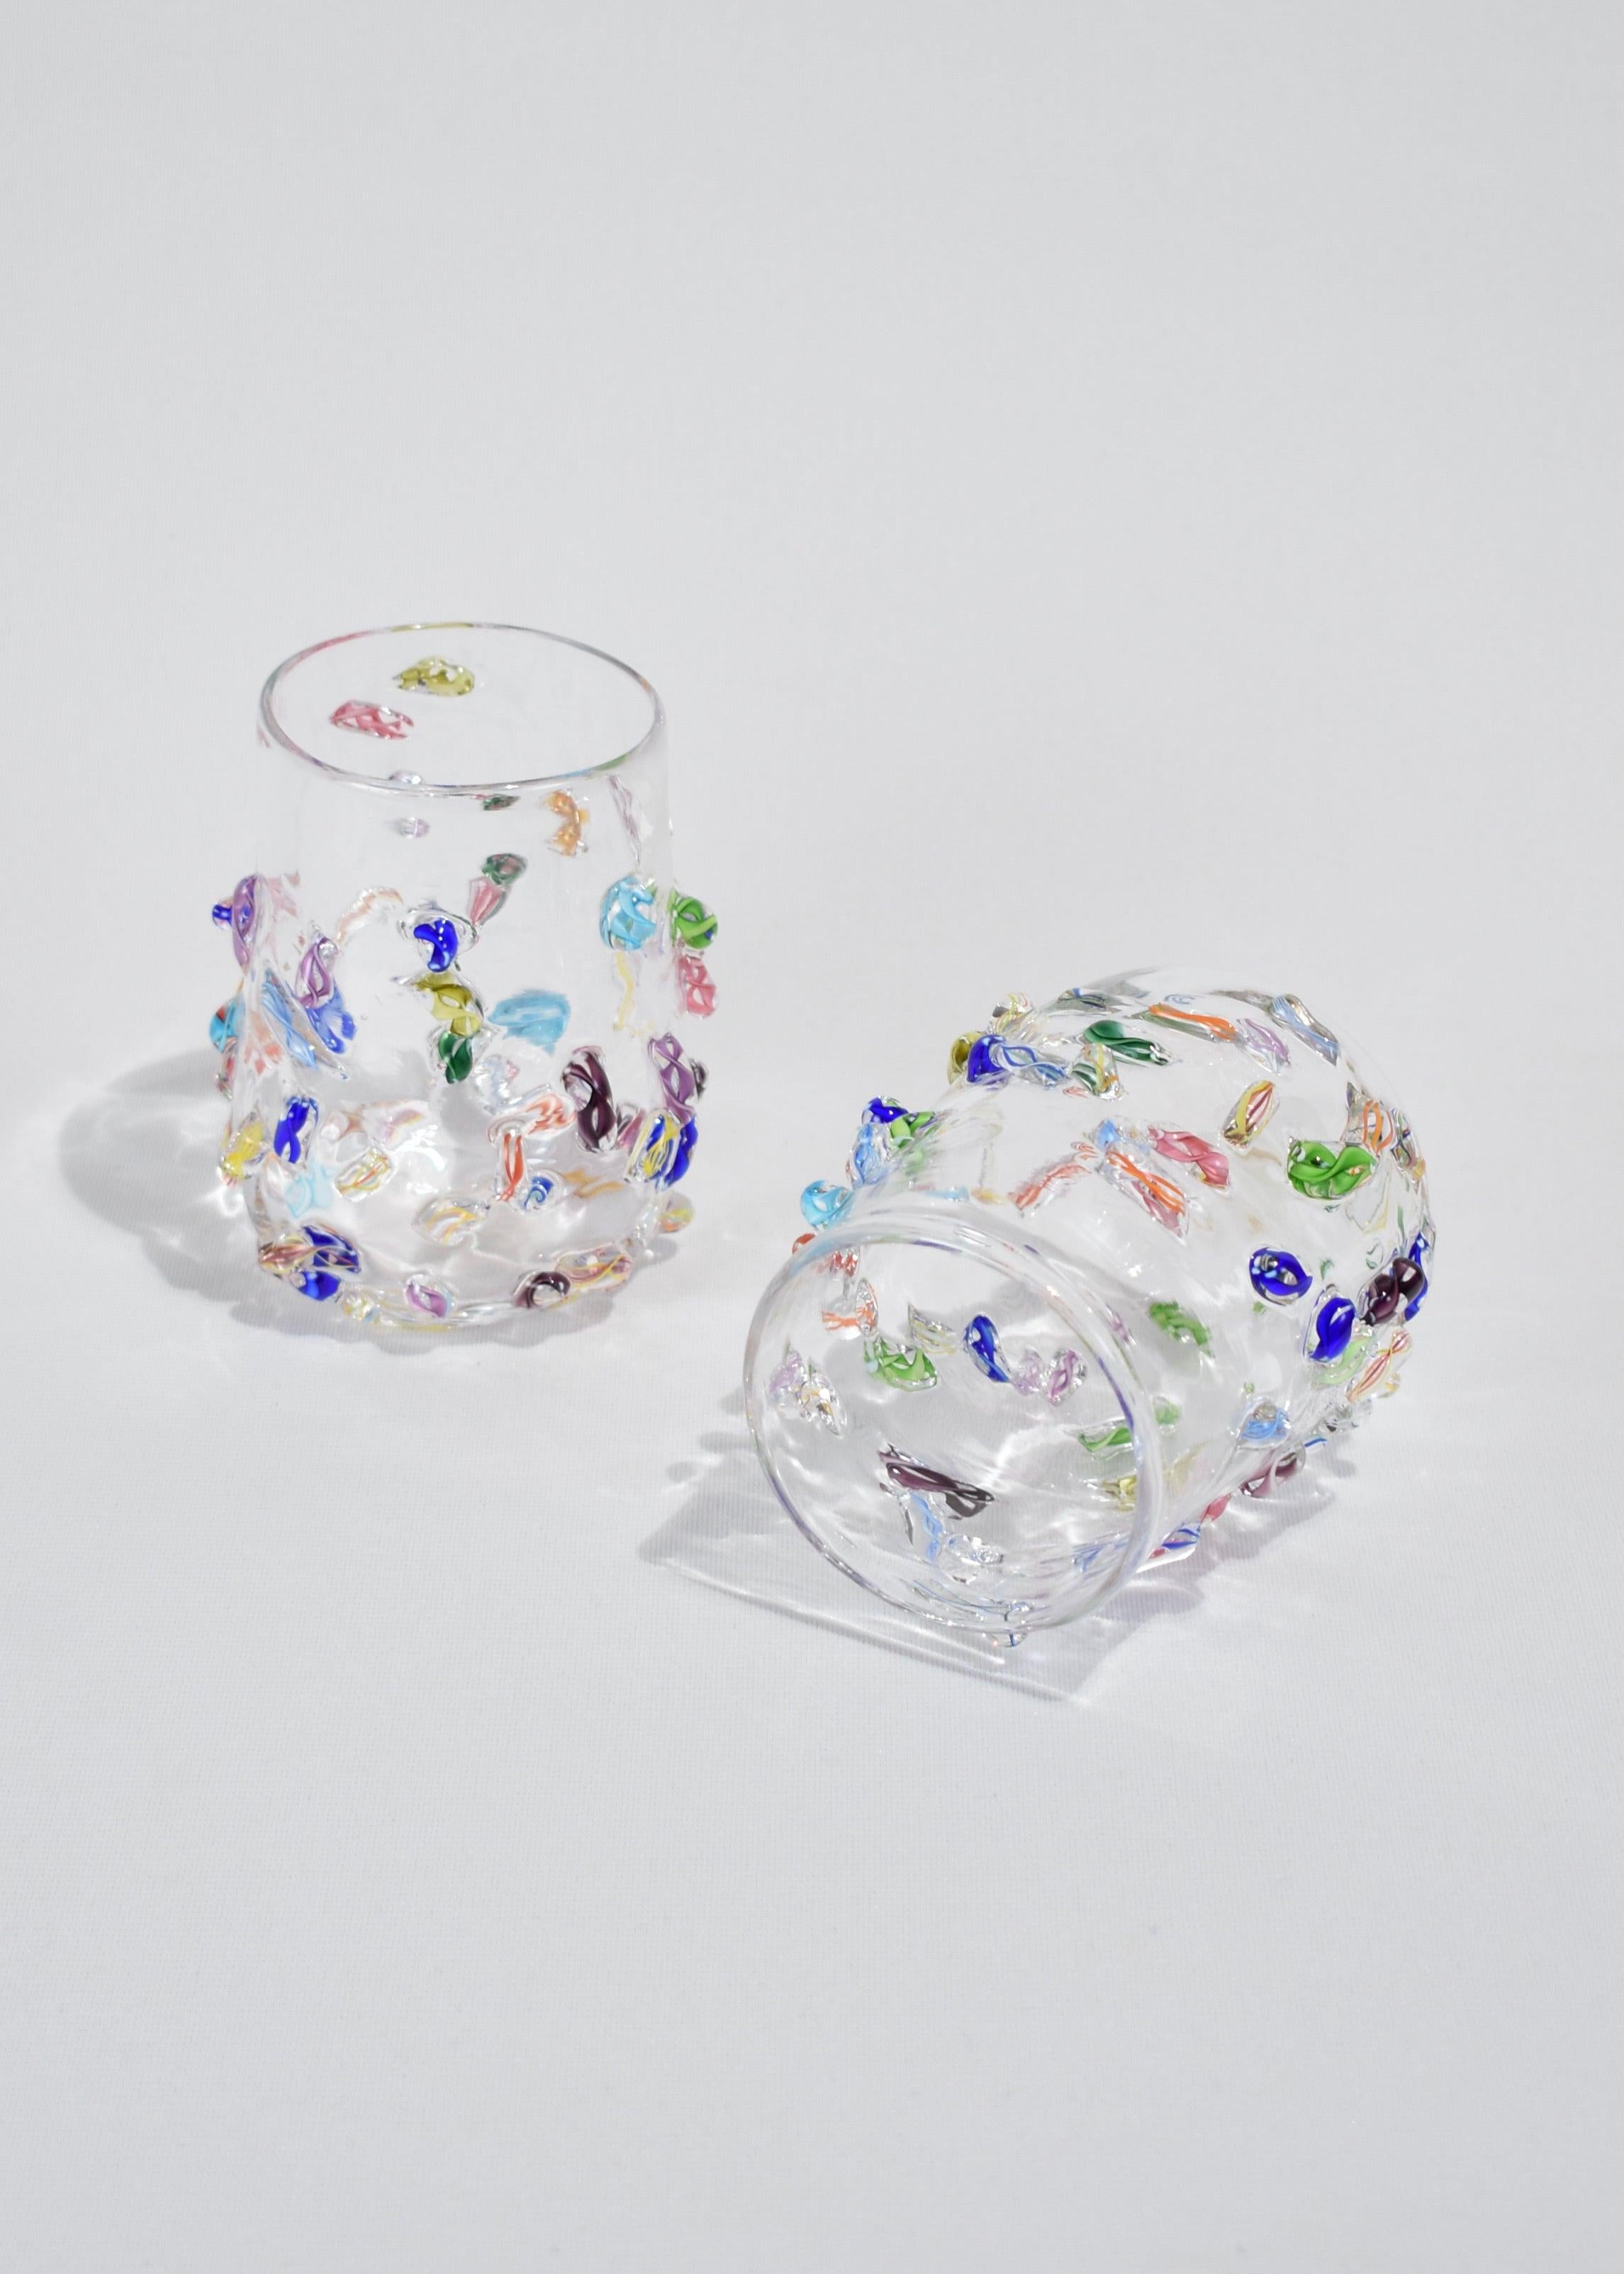 Blown glass tumbler set of two with applied cane decoration. Handmade in USA by Lisa Stover. Exclusive to Casa Shop.

Please note: Due to the handmade nature of these tumblers, subtle variations in form and finish are to be expected. Hand wash